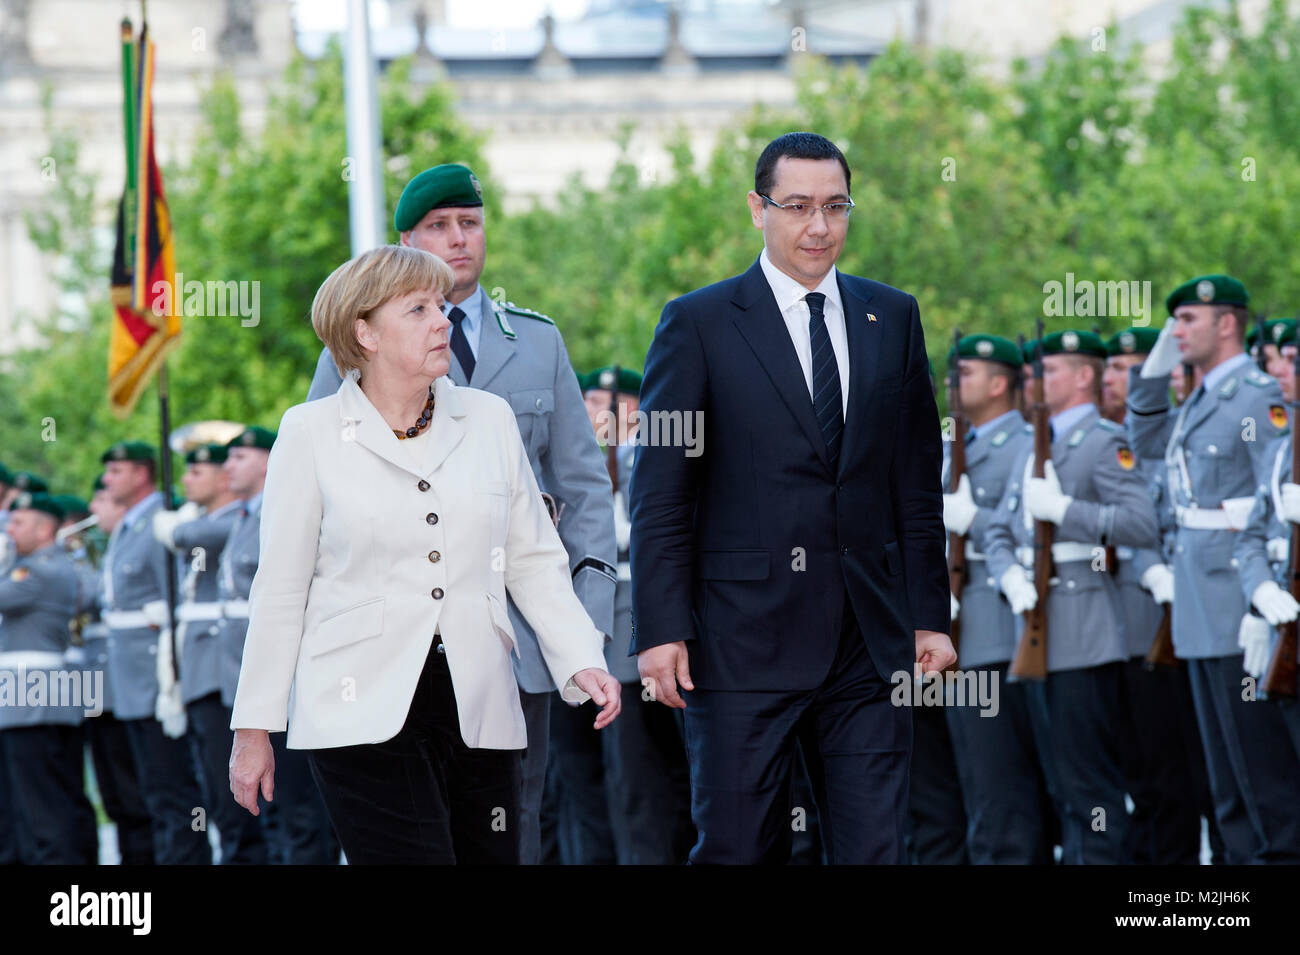 German Chancellor Angela Merkel receives with Military honors the Romanian Prime Minister Victor Ponta to a bilateral meeting to talk about European and International issues. Stock Photo